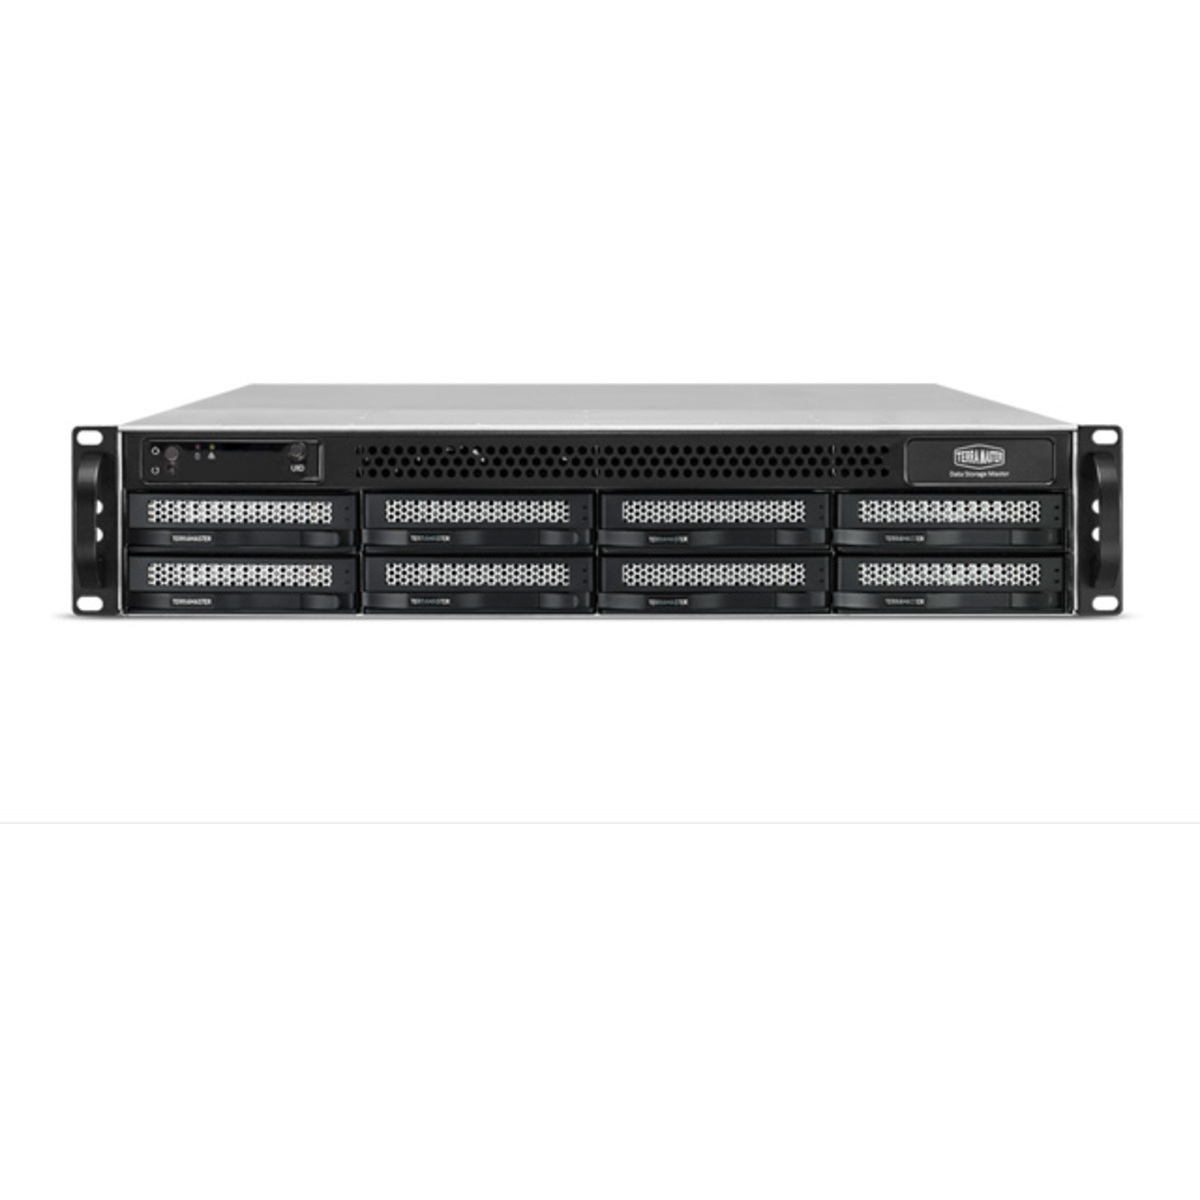 TerraMaster U8-423 20tb 8-Bay RackMount Multimedia / Power User / Business NAS - Network Attached Storage Device 5x4tb Seagate IronWolf Pro ST4000NT001 3.5 7200rpm SATA 6Gb/s HDD NAS Class Drives Installed - Burn-In Tested - FREE RAM UPGRADE U8-423